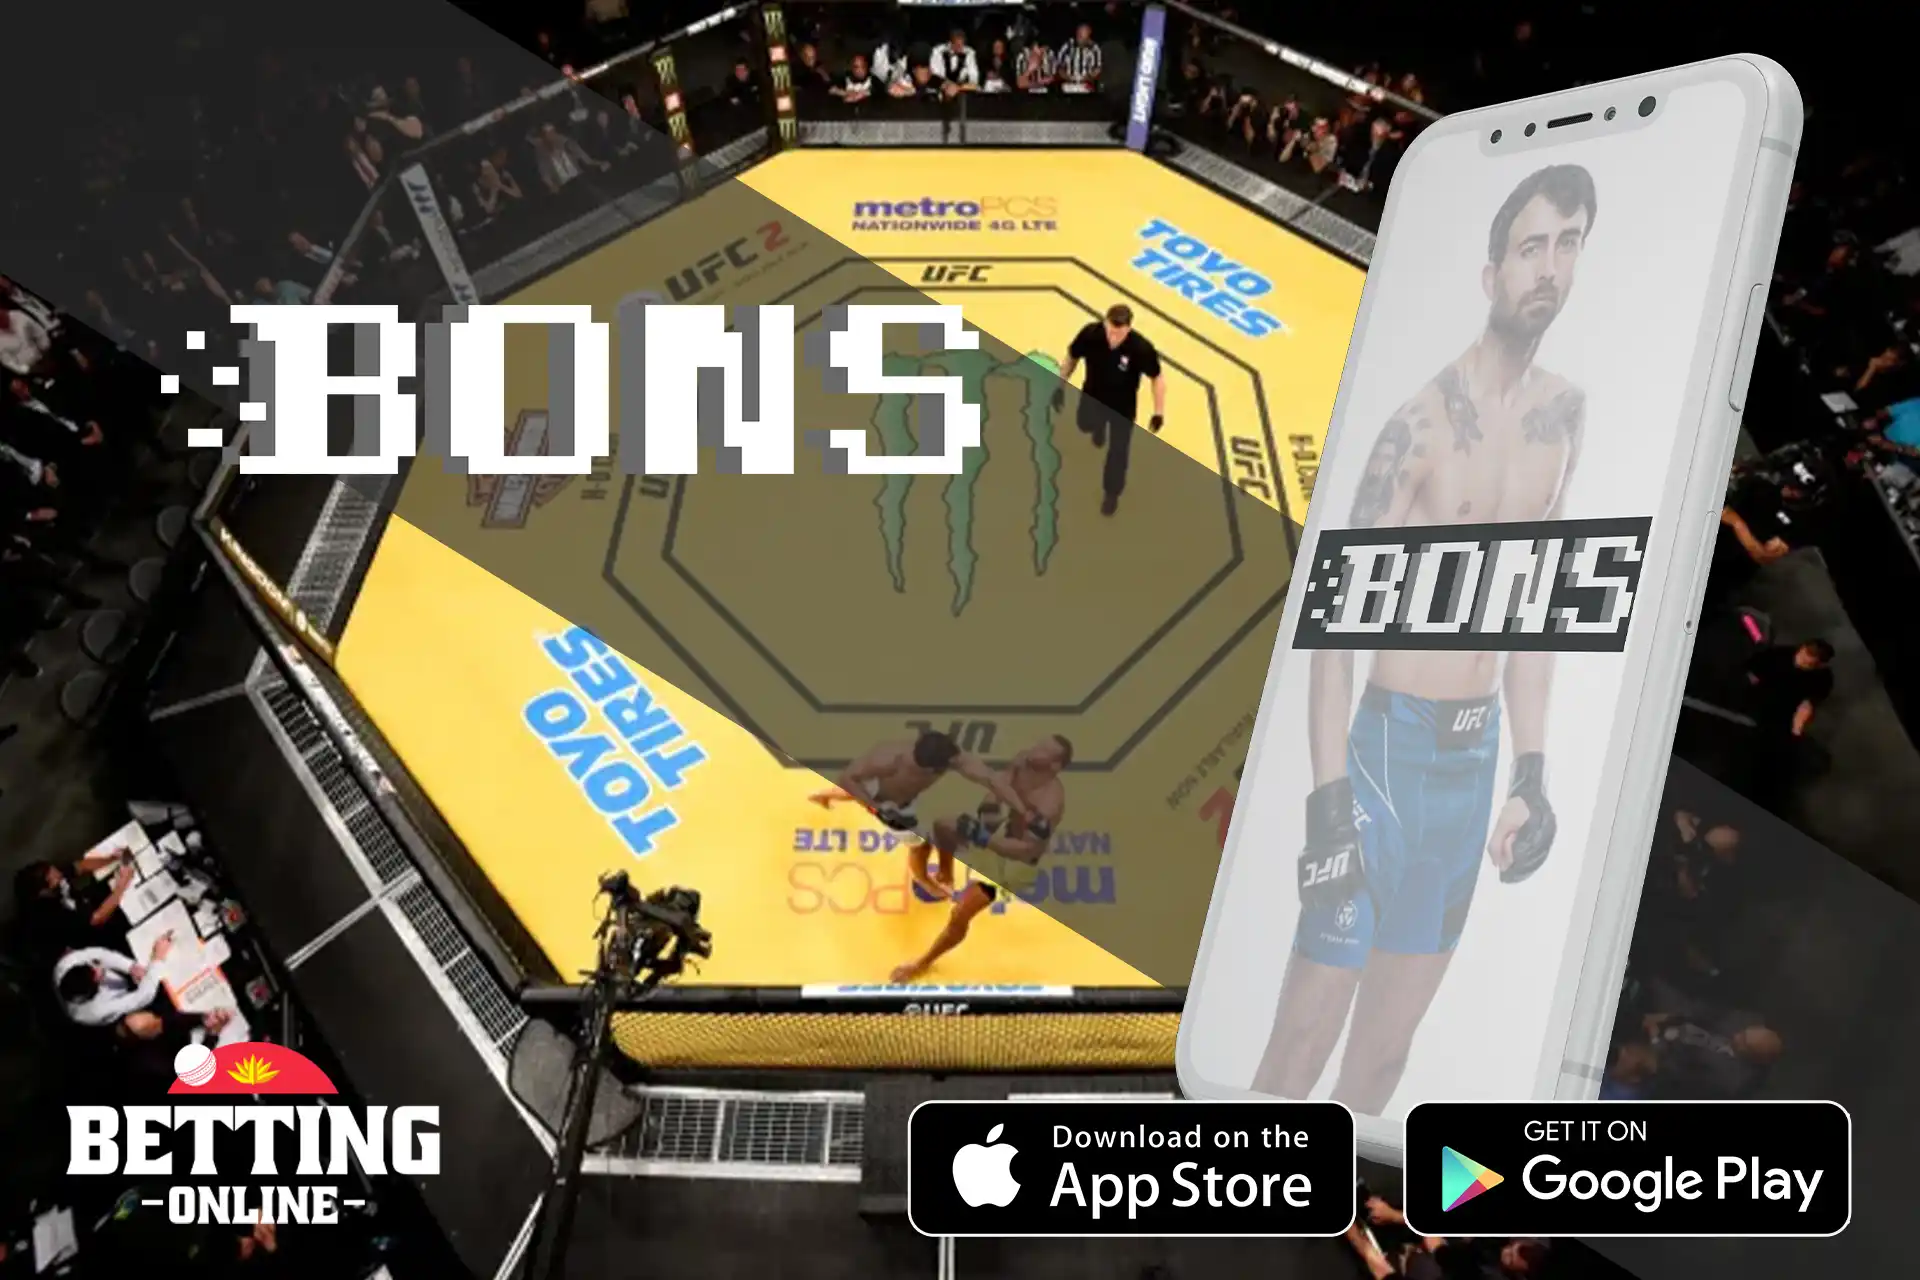 Bet on UFC on the Bons website and win money.